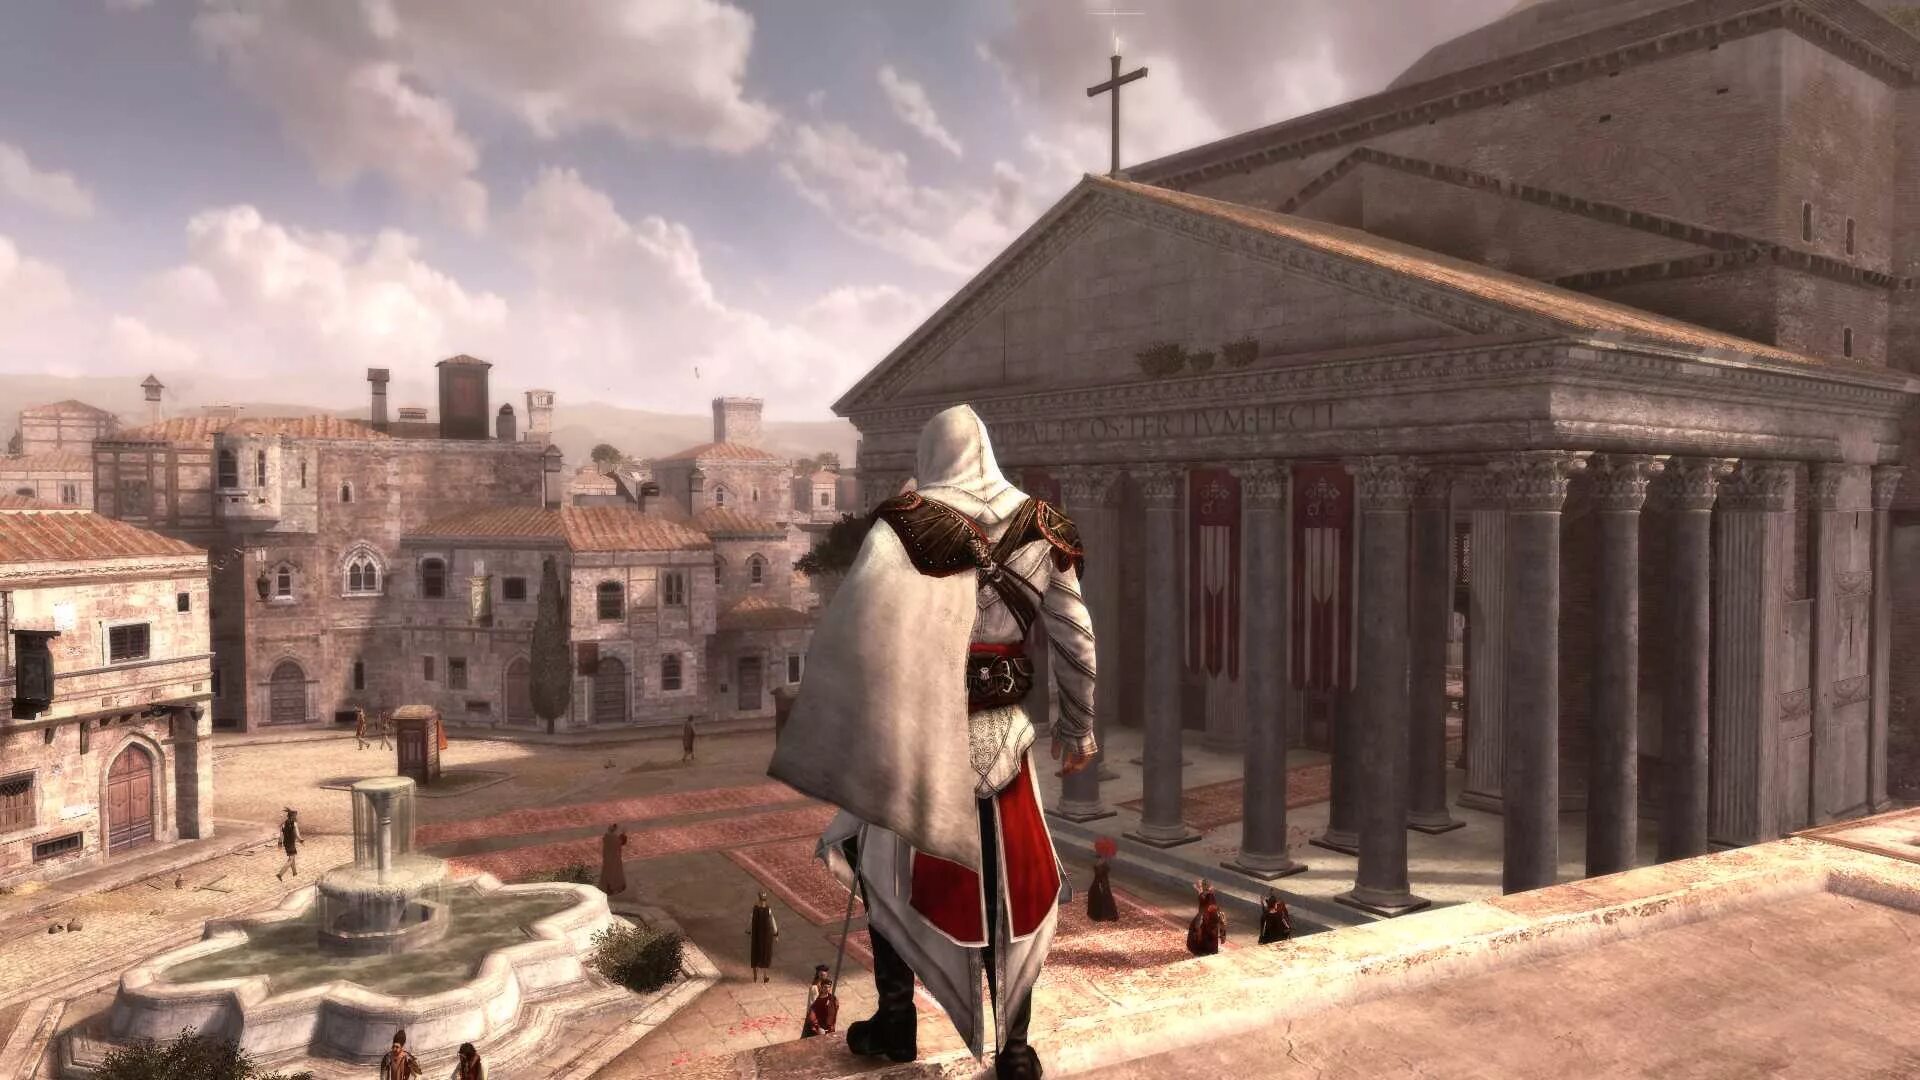 Assassins Creed Ezio collection ps4. Assassin’s Creed the Ezio collection. Assassins Creed 2 Эцио. Assassin's Creed Эцио Аудиторе коллекция. Игры ps4 assassins creed